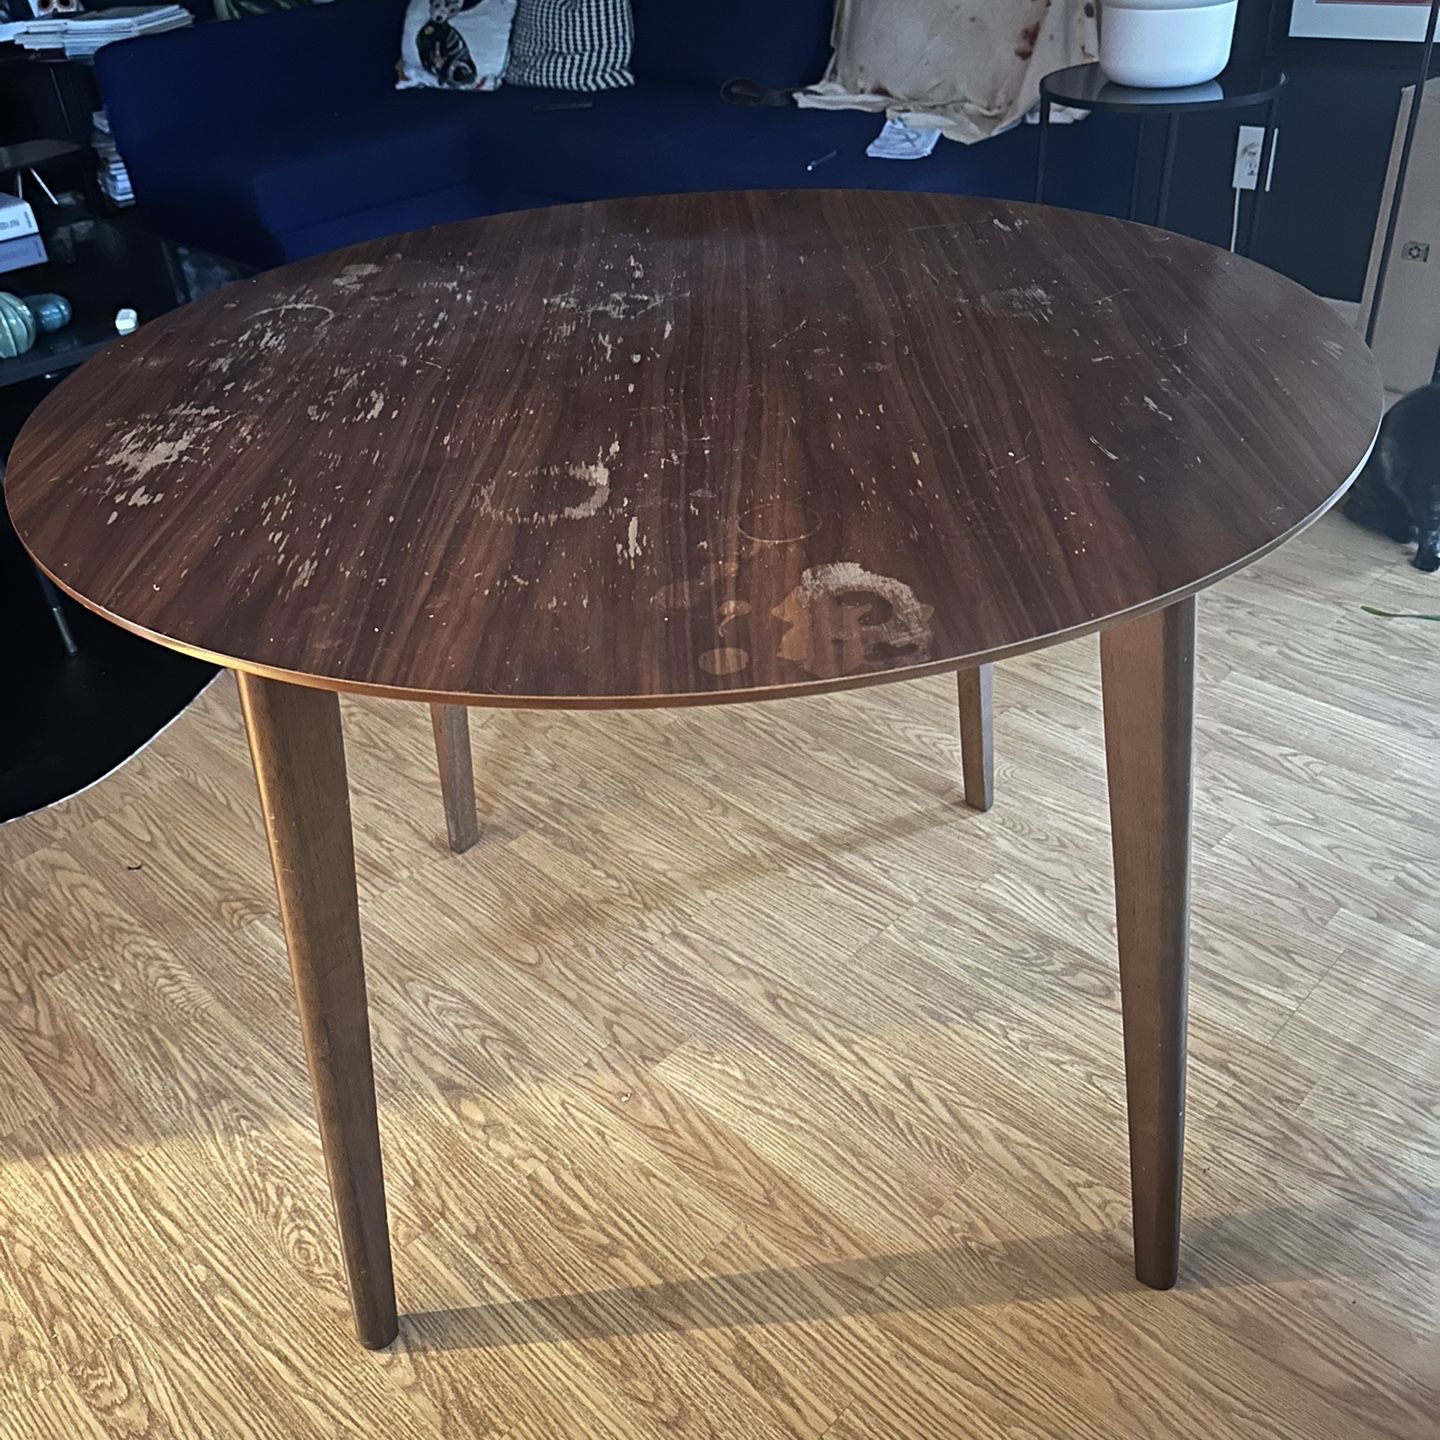 WOOD ROUND DINING KITCHEN TABLE